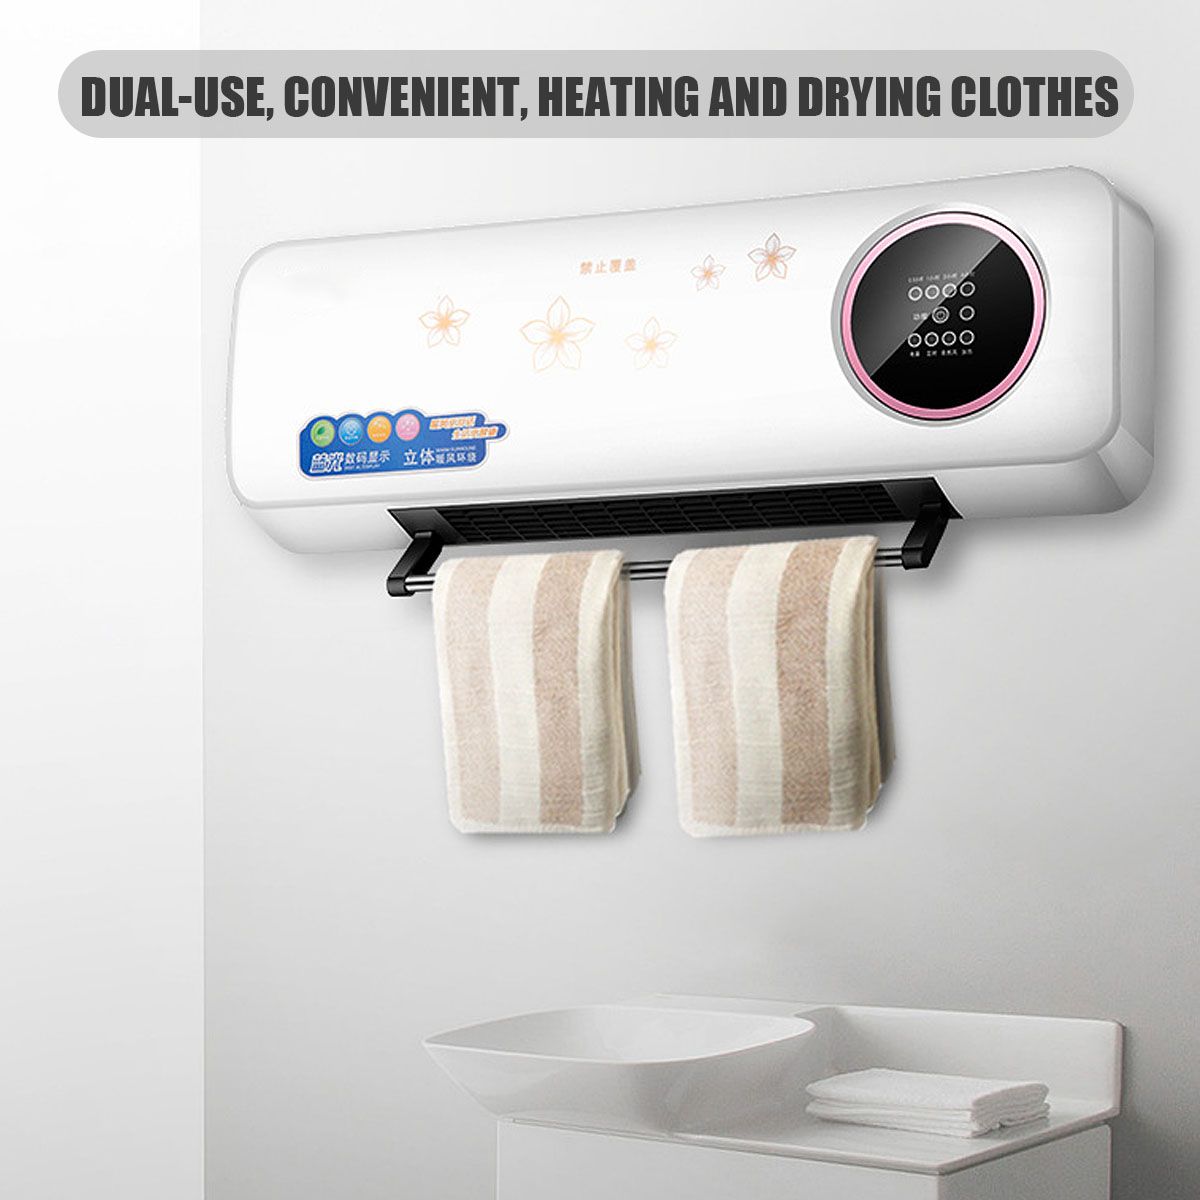 2000W-Electric-Timing-Wall-Mounted-Heater-Space-Heating-Air-Conditioner-W-Remote-1408861